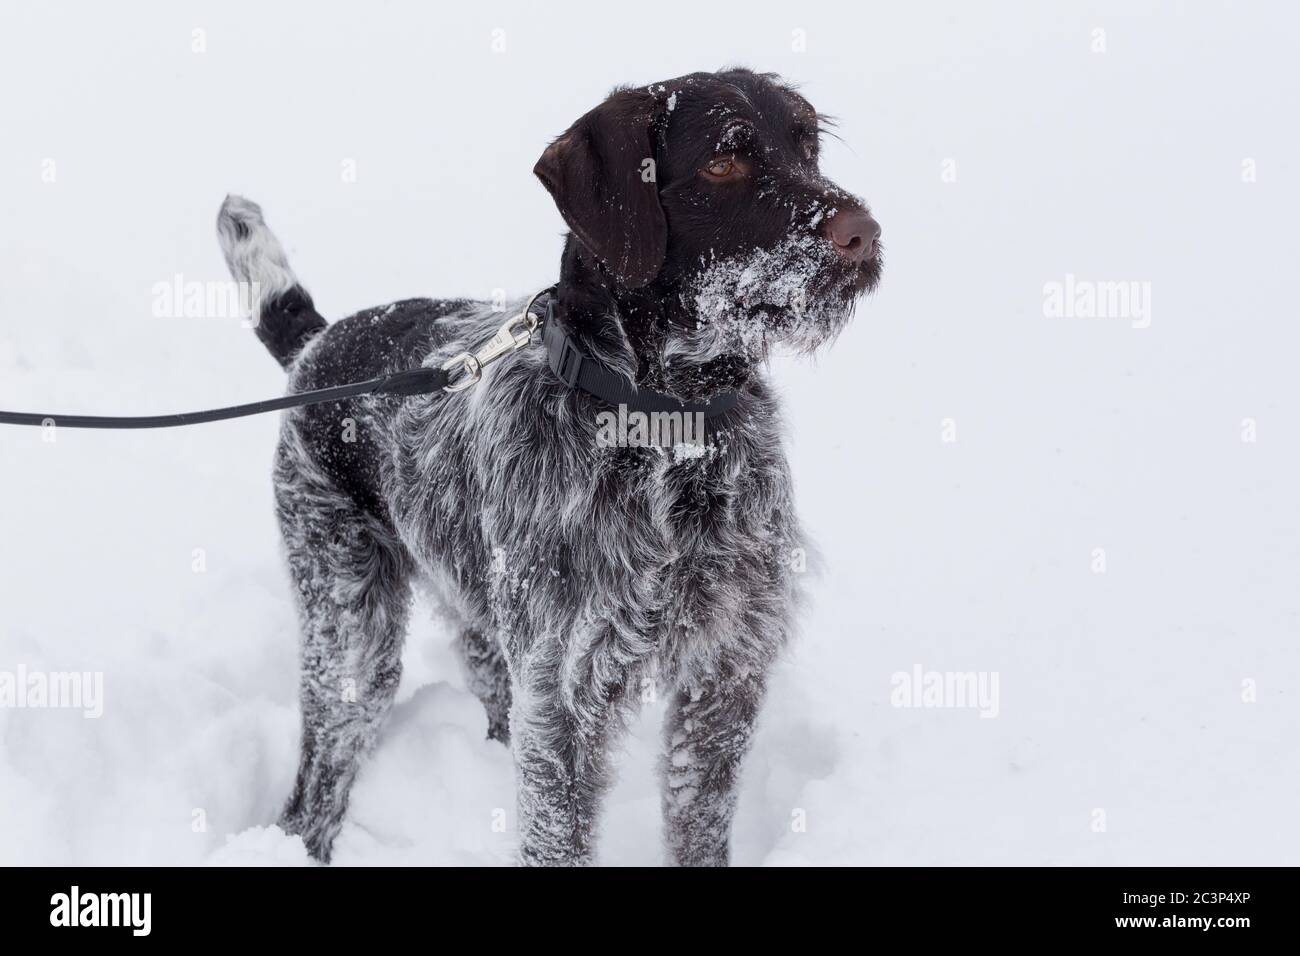 Cute deutsch drahthaar is standing on a white snow in the winter park. Pet animals. Purebred dog. Stock Photo